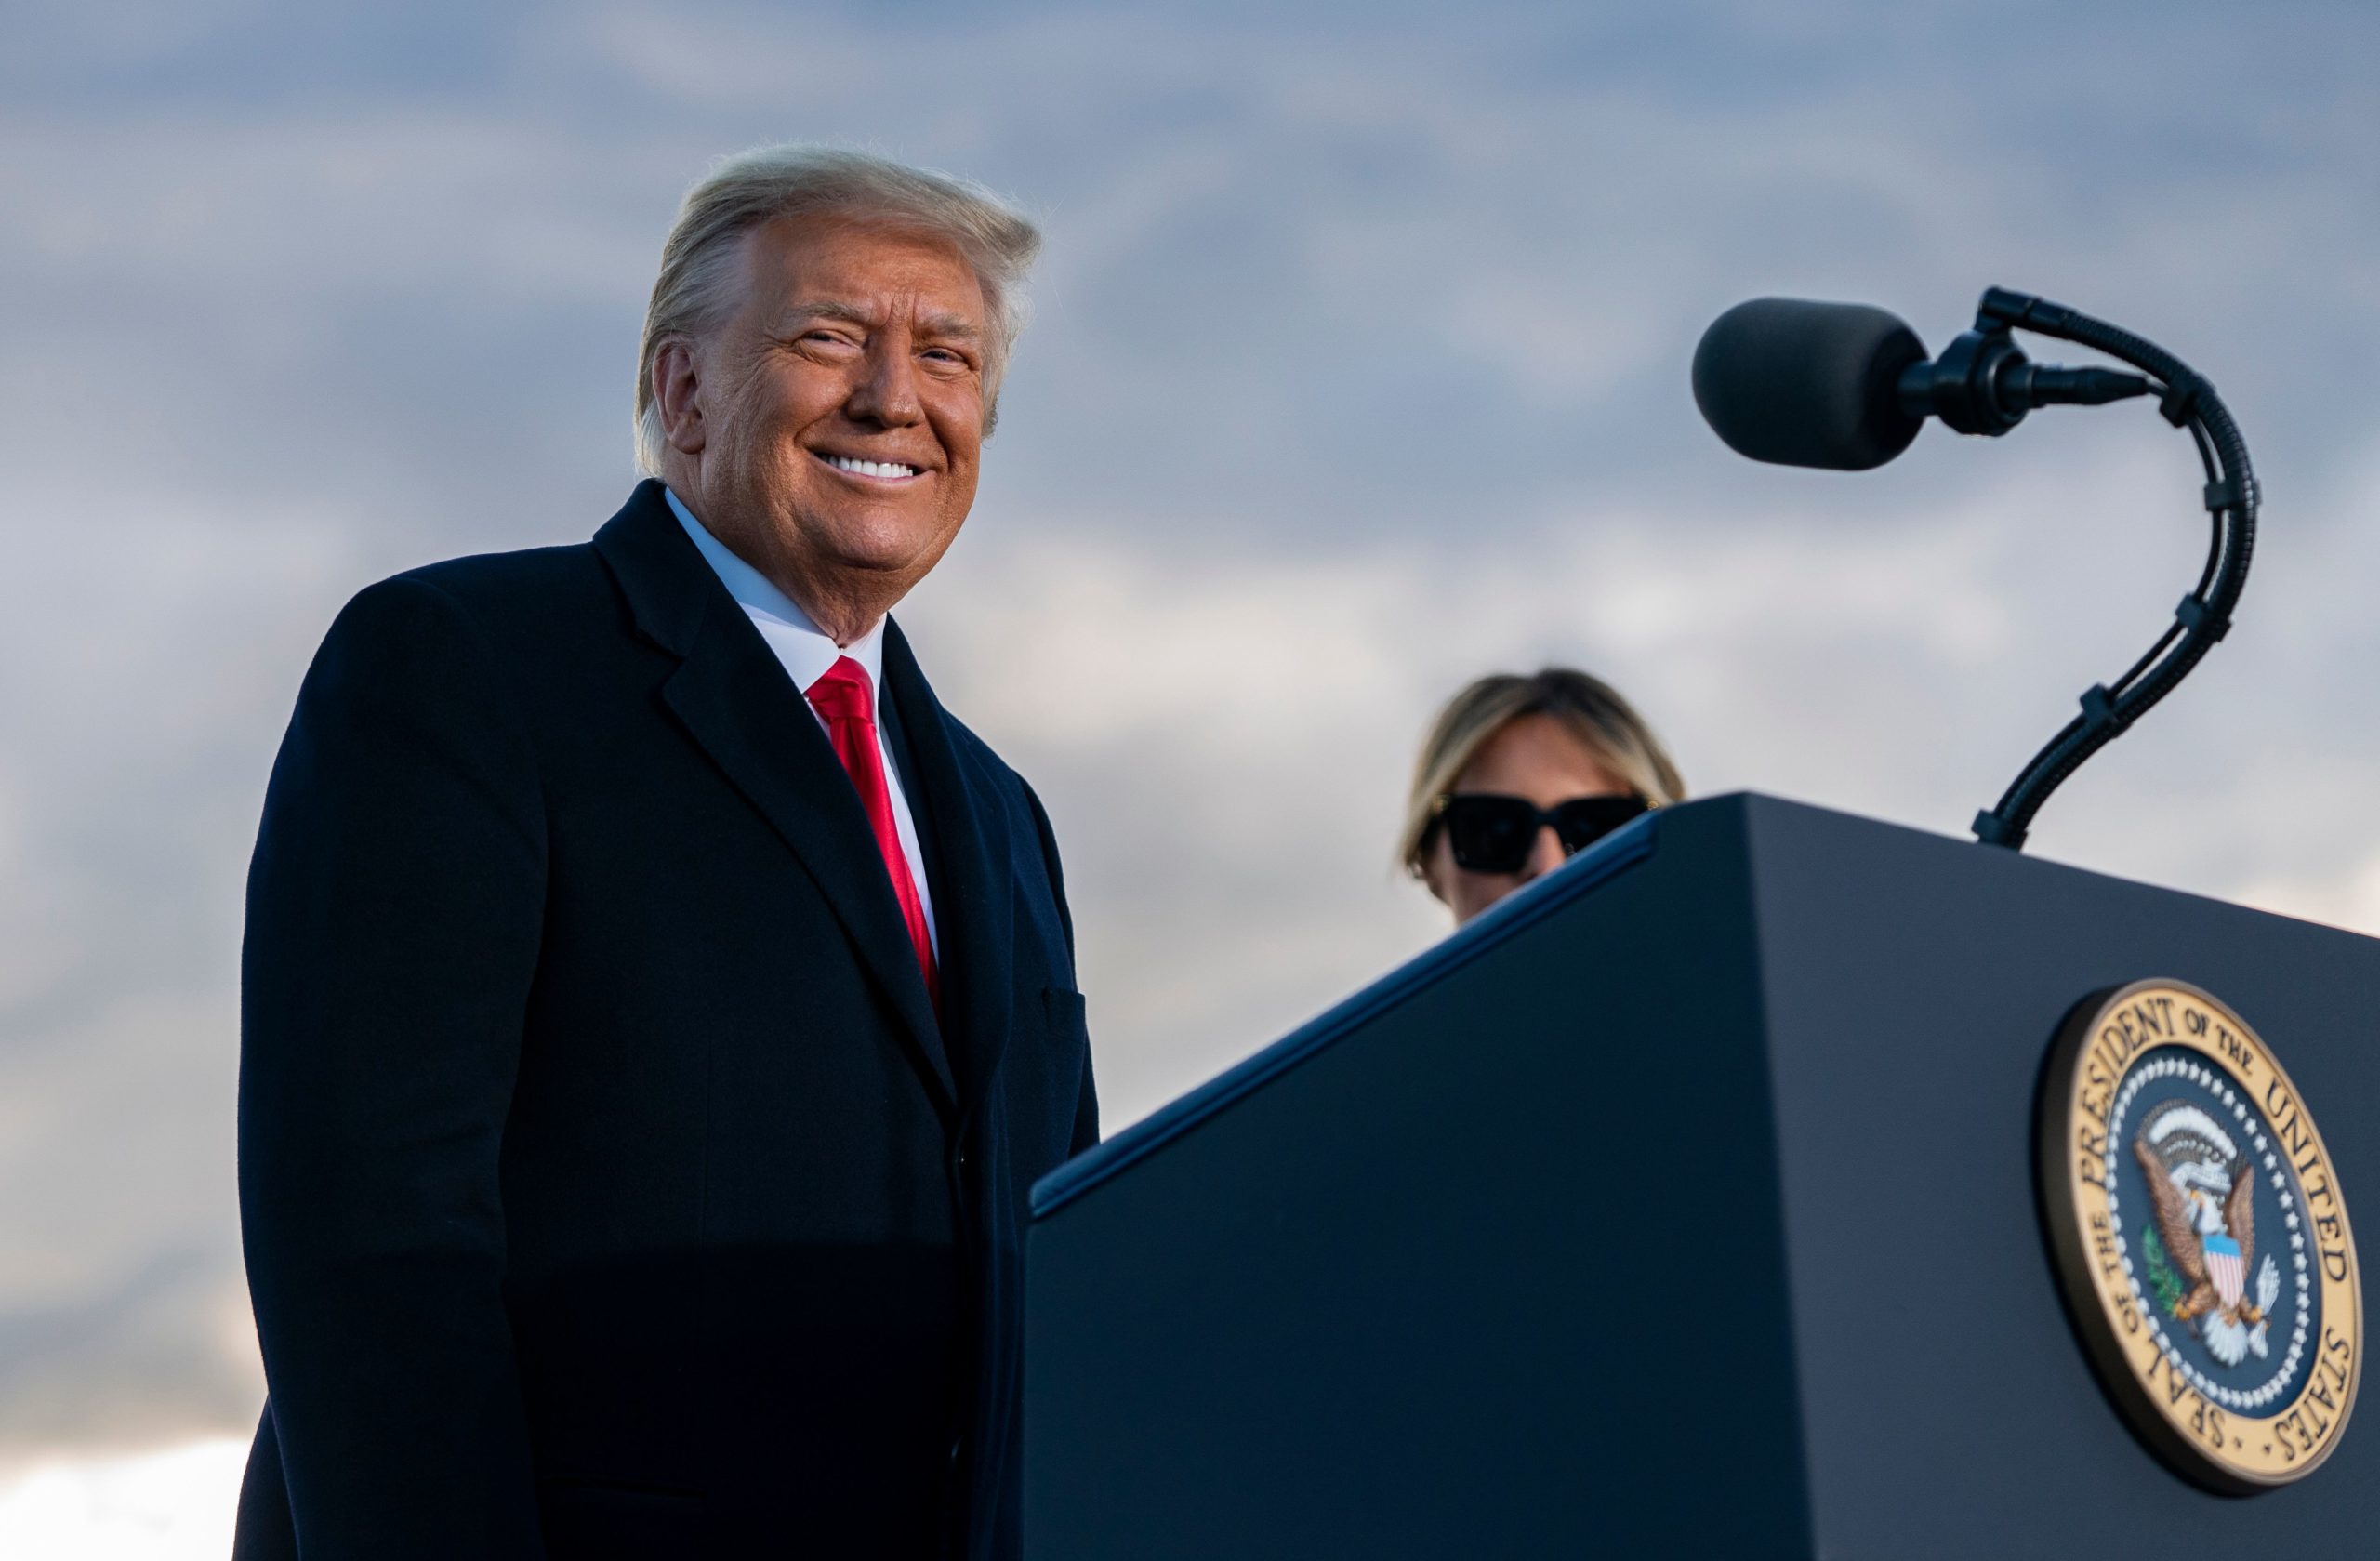 Outgoing US President Donald Trump and First Lady Melania Trump address guests at Joint Base Andrews in Maryland on January 20, 2021. - President Trump and the First Lady travel to their Mar-a-Lago golf club residence in Palm Beach, Florida, and will not attend the inauguration for President-elect Joe Biden. (Photo by ALEX EDELMAN/AFP via Getty Images)